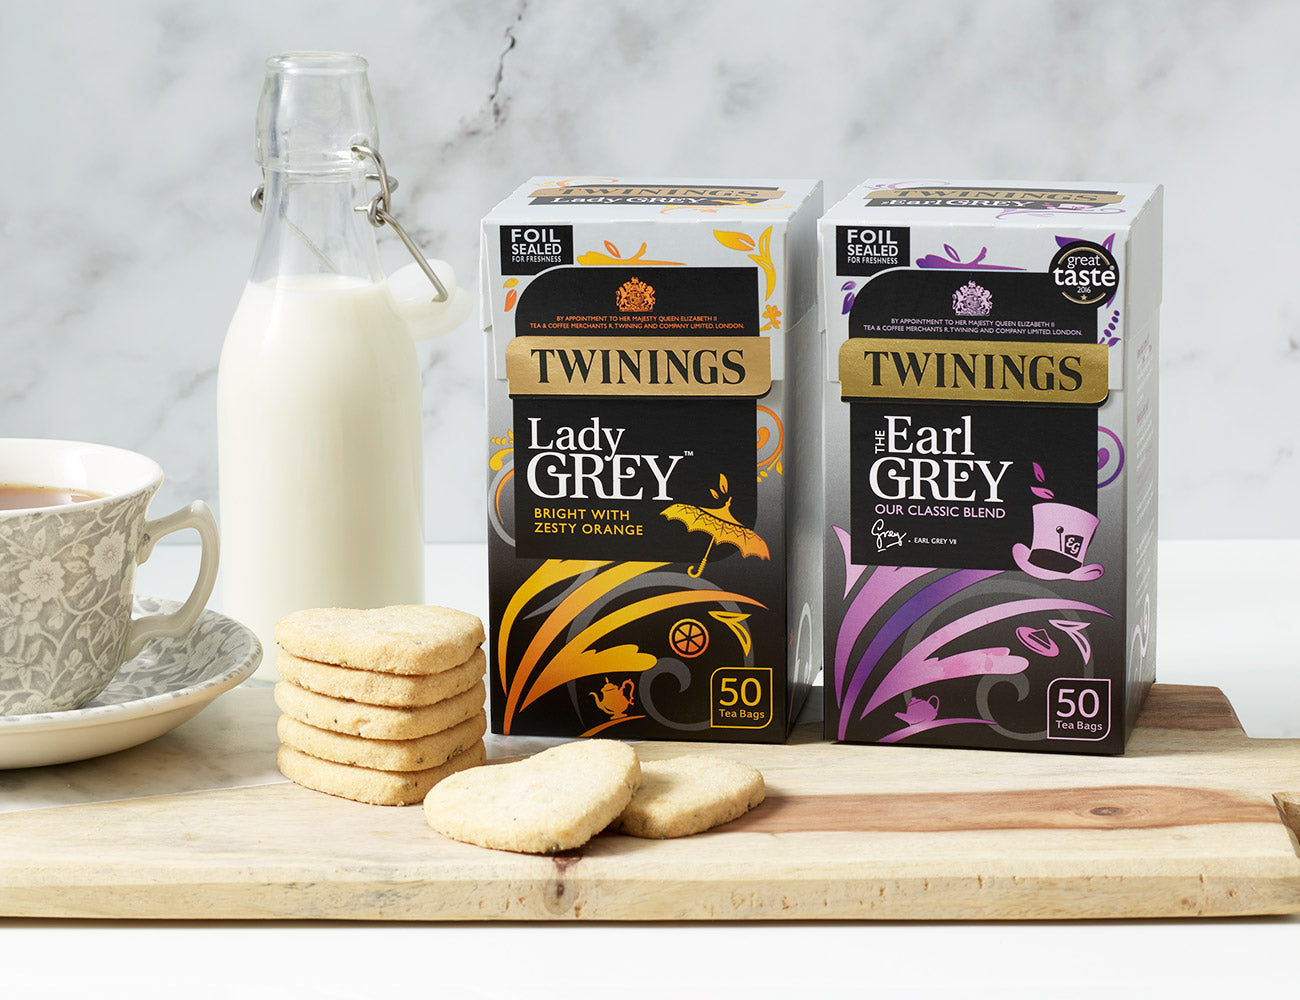 Mew Mew bud ujævnheder Earl Grey Flavours from Twinings - Discover our Range